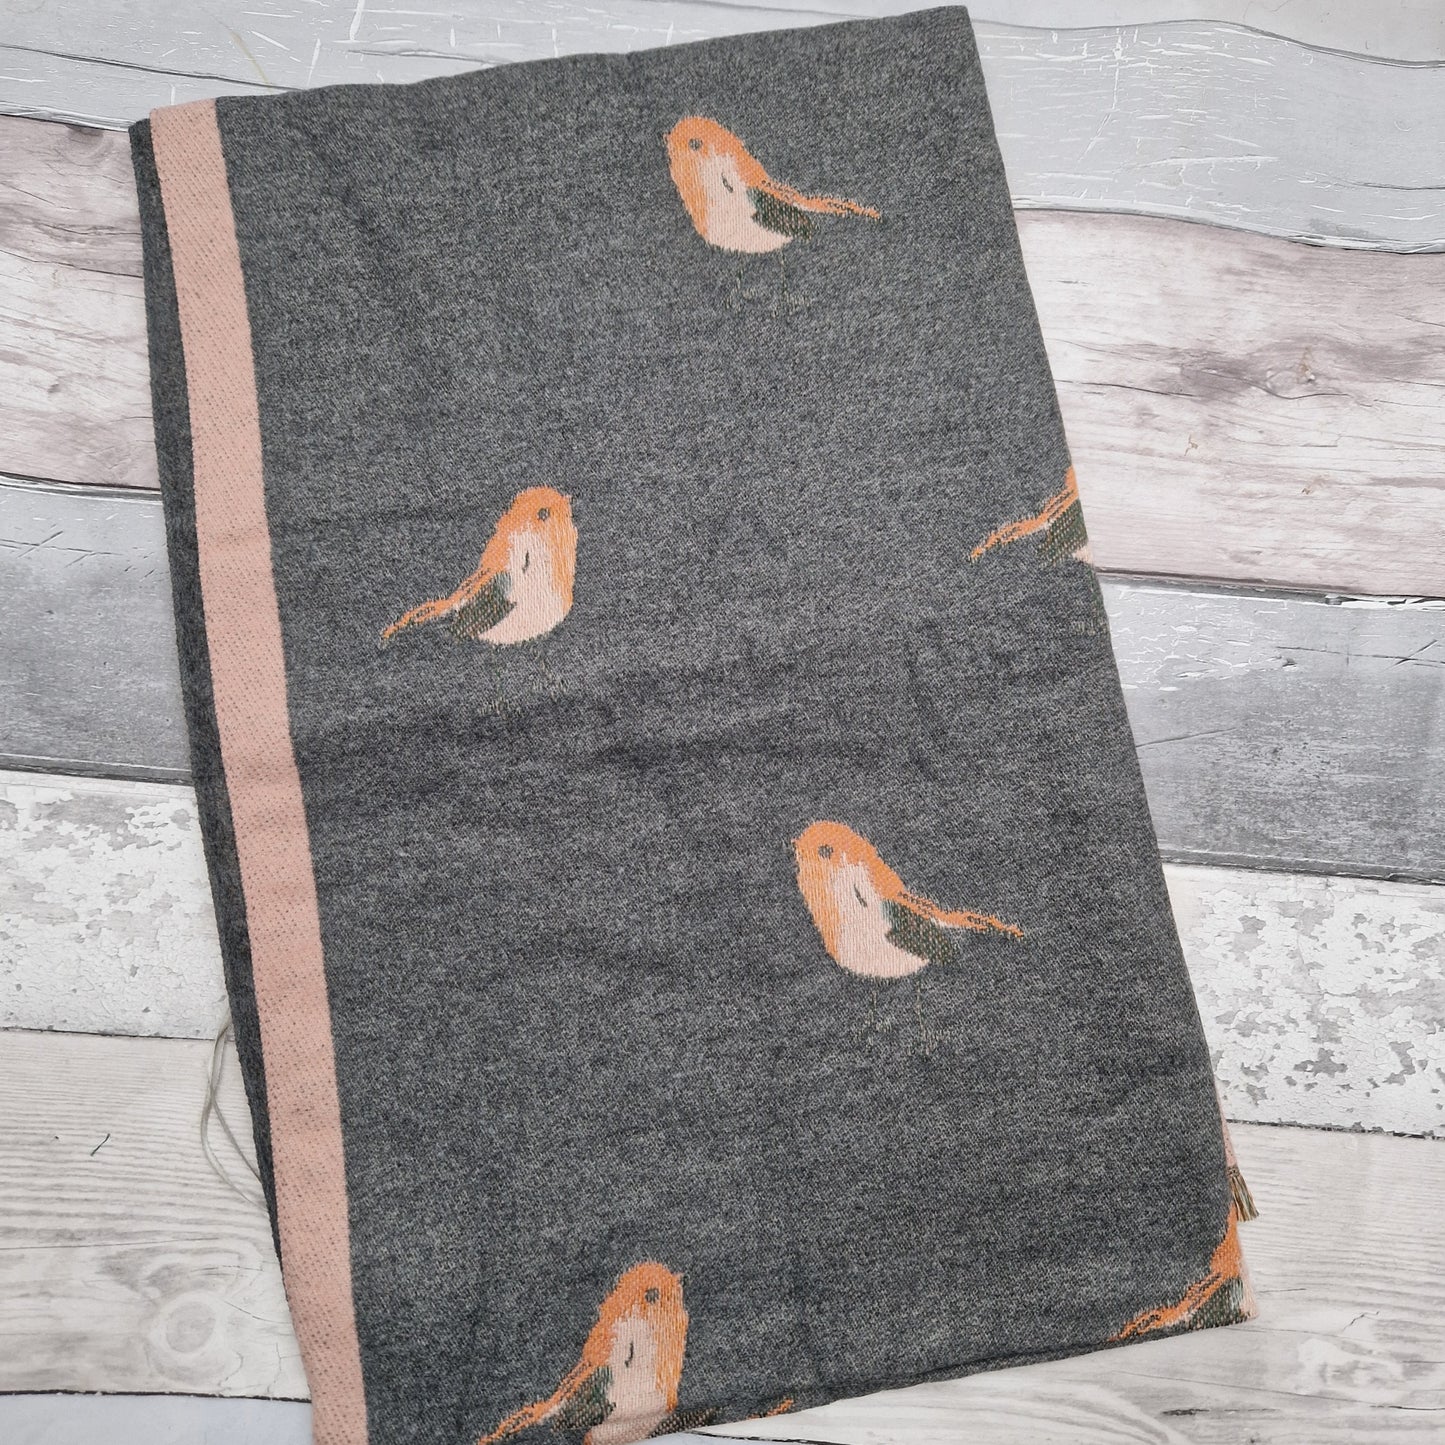 Grey and pink coloured scarf decorated with Robins.